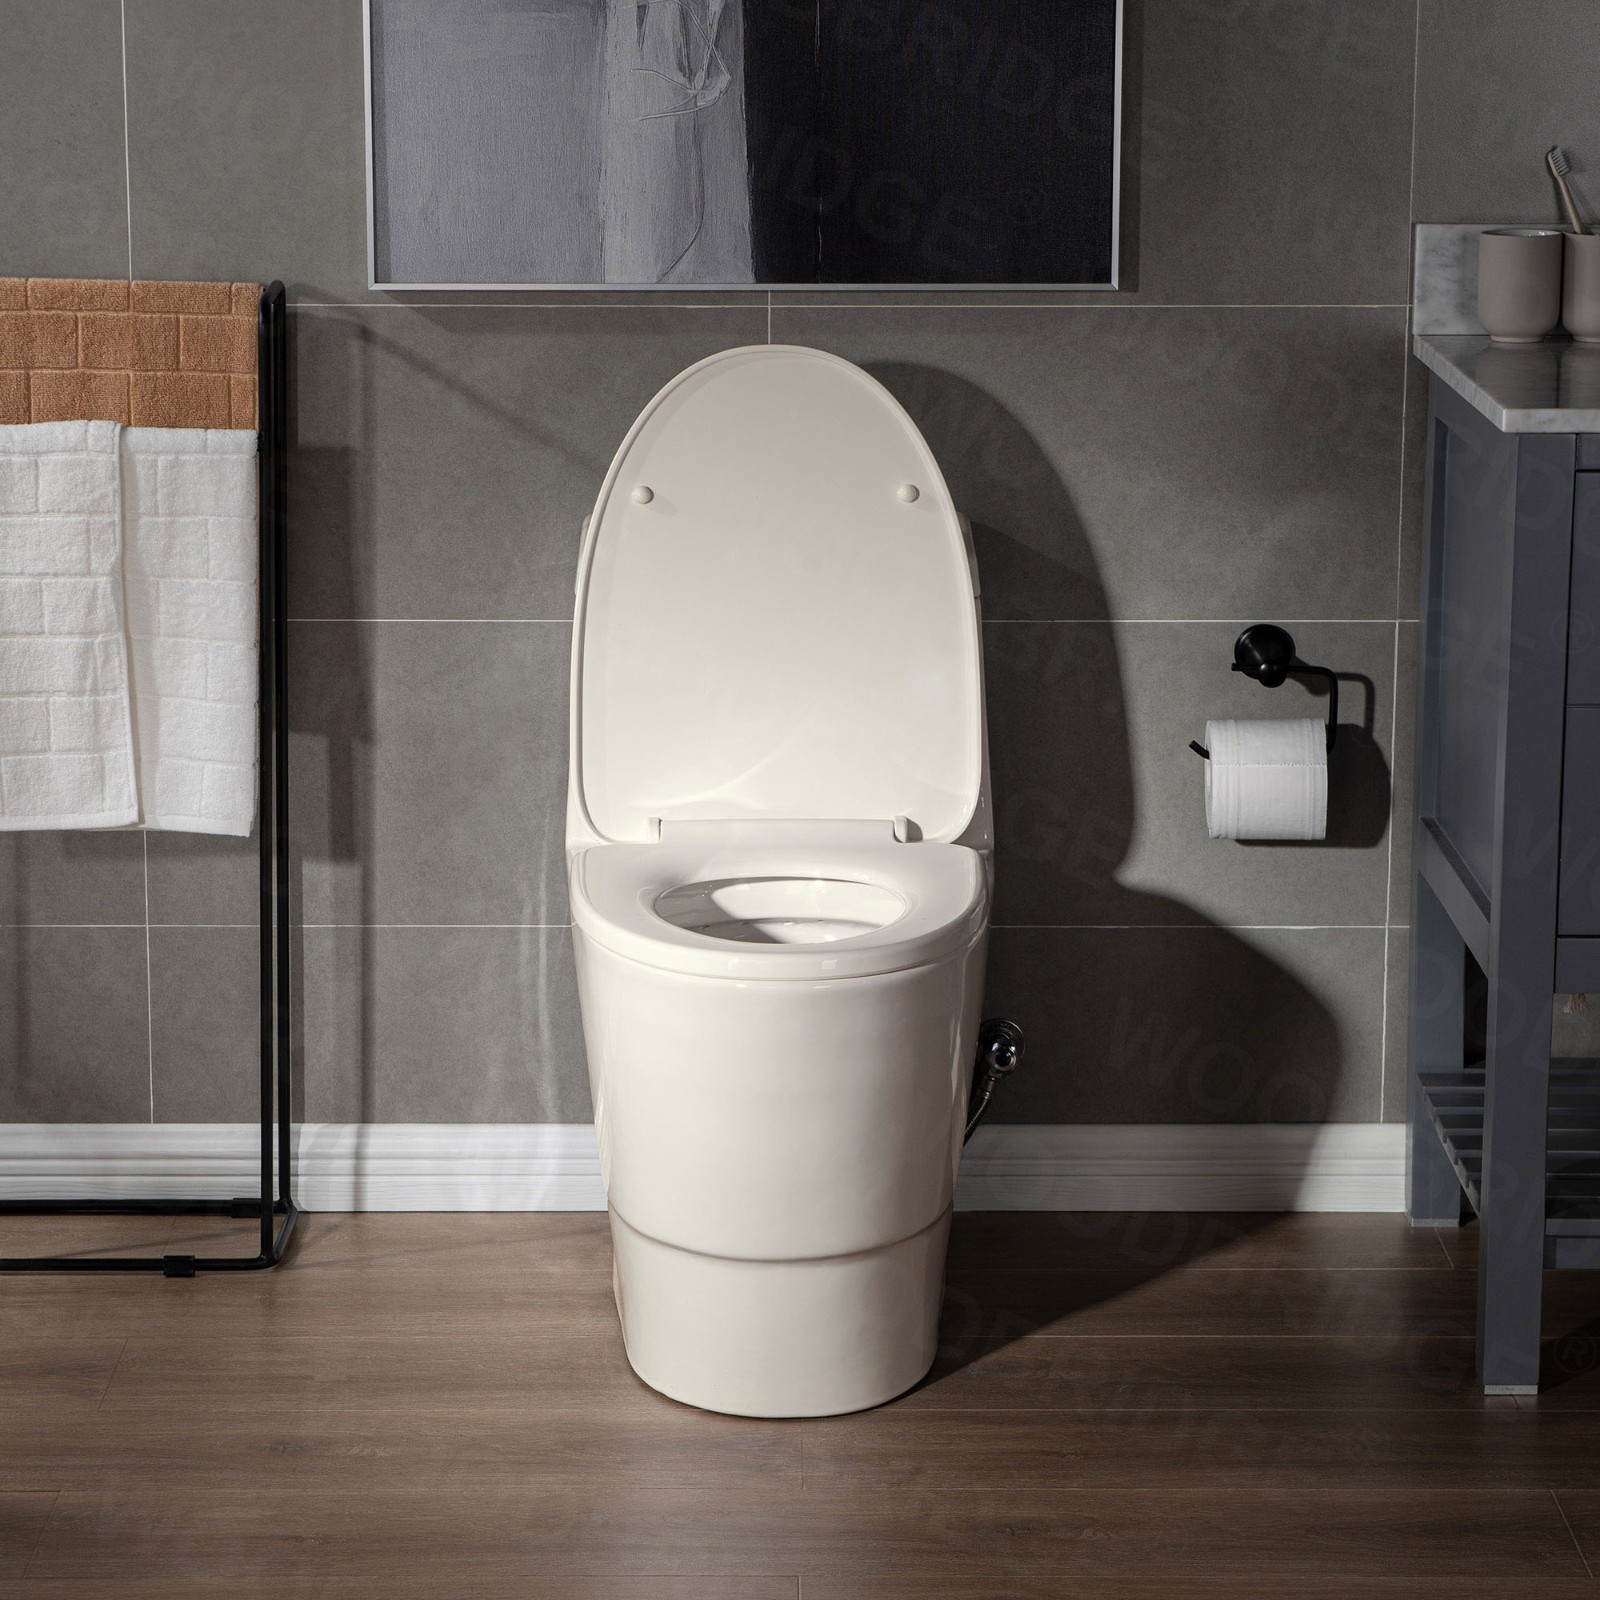  WOODBRIDGEE One Piece Toilet with Soft Closing Seat, Chair Height, 1.28 GPF Dual, Water Sensed, 1000 Gram MaP Flushing Score Toilet, B0942, Biscuit_5367